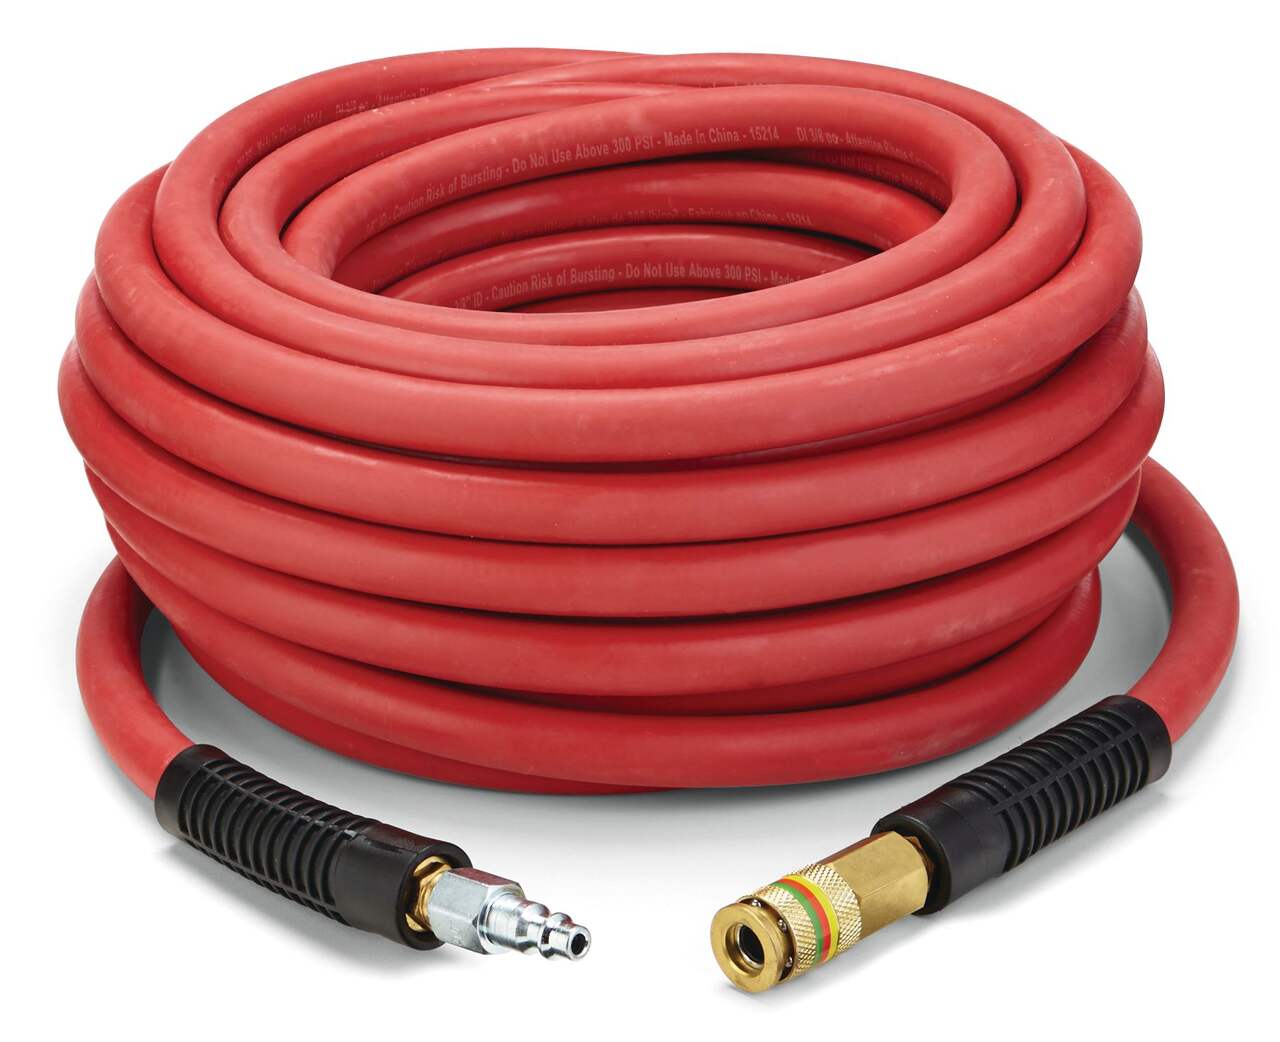 MAXIMUM All-Weather Rubber Air Hose, 3/8-in x 50-ft